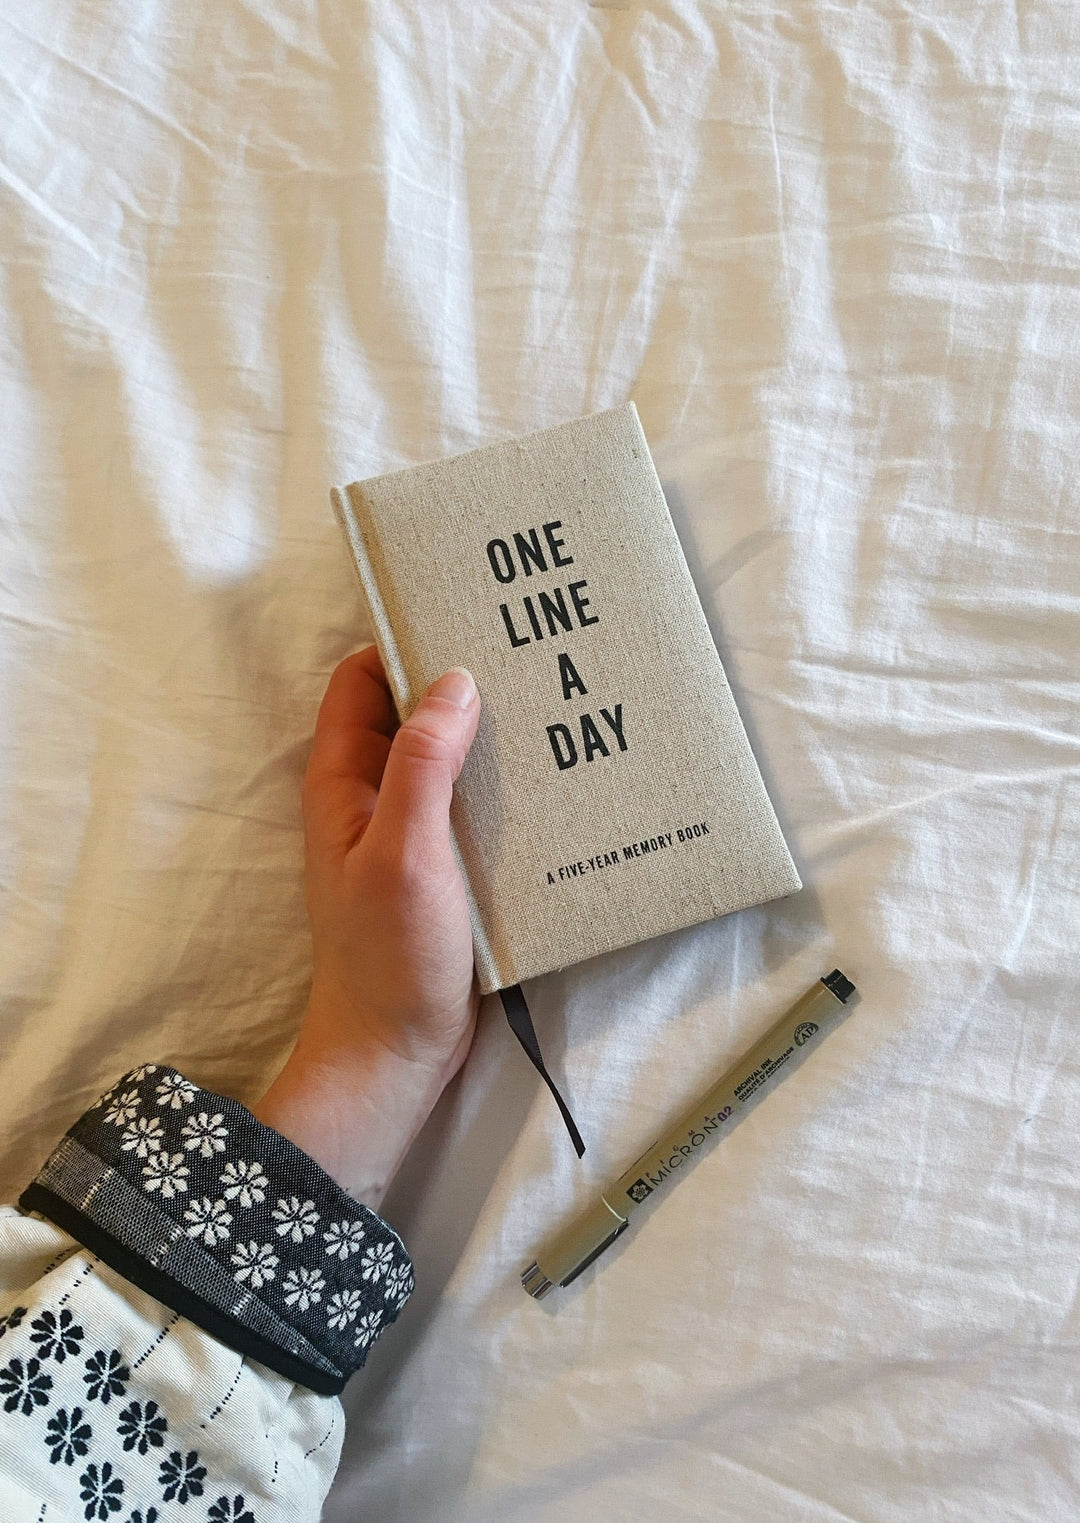 One Line a Day journal laying on a bed with a pen.